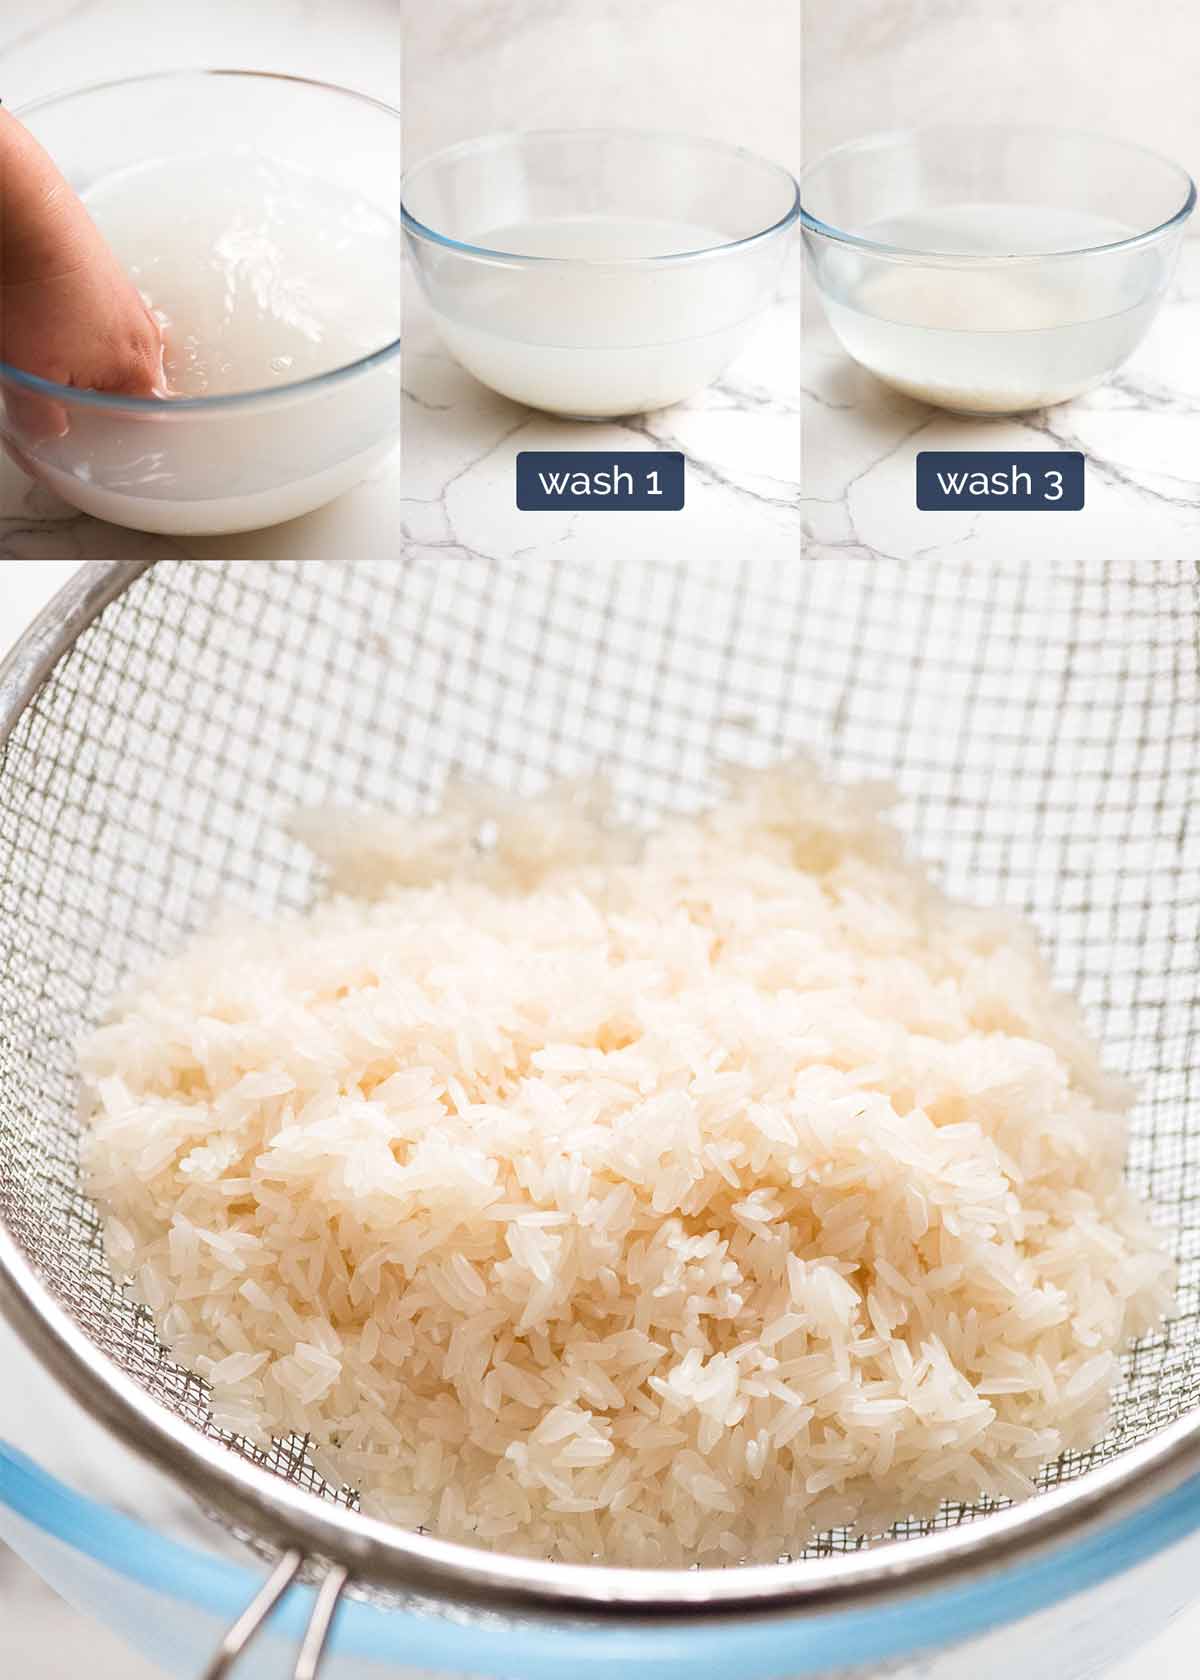 How Much Rice Does 1/2 Cup Make? 